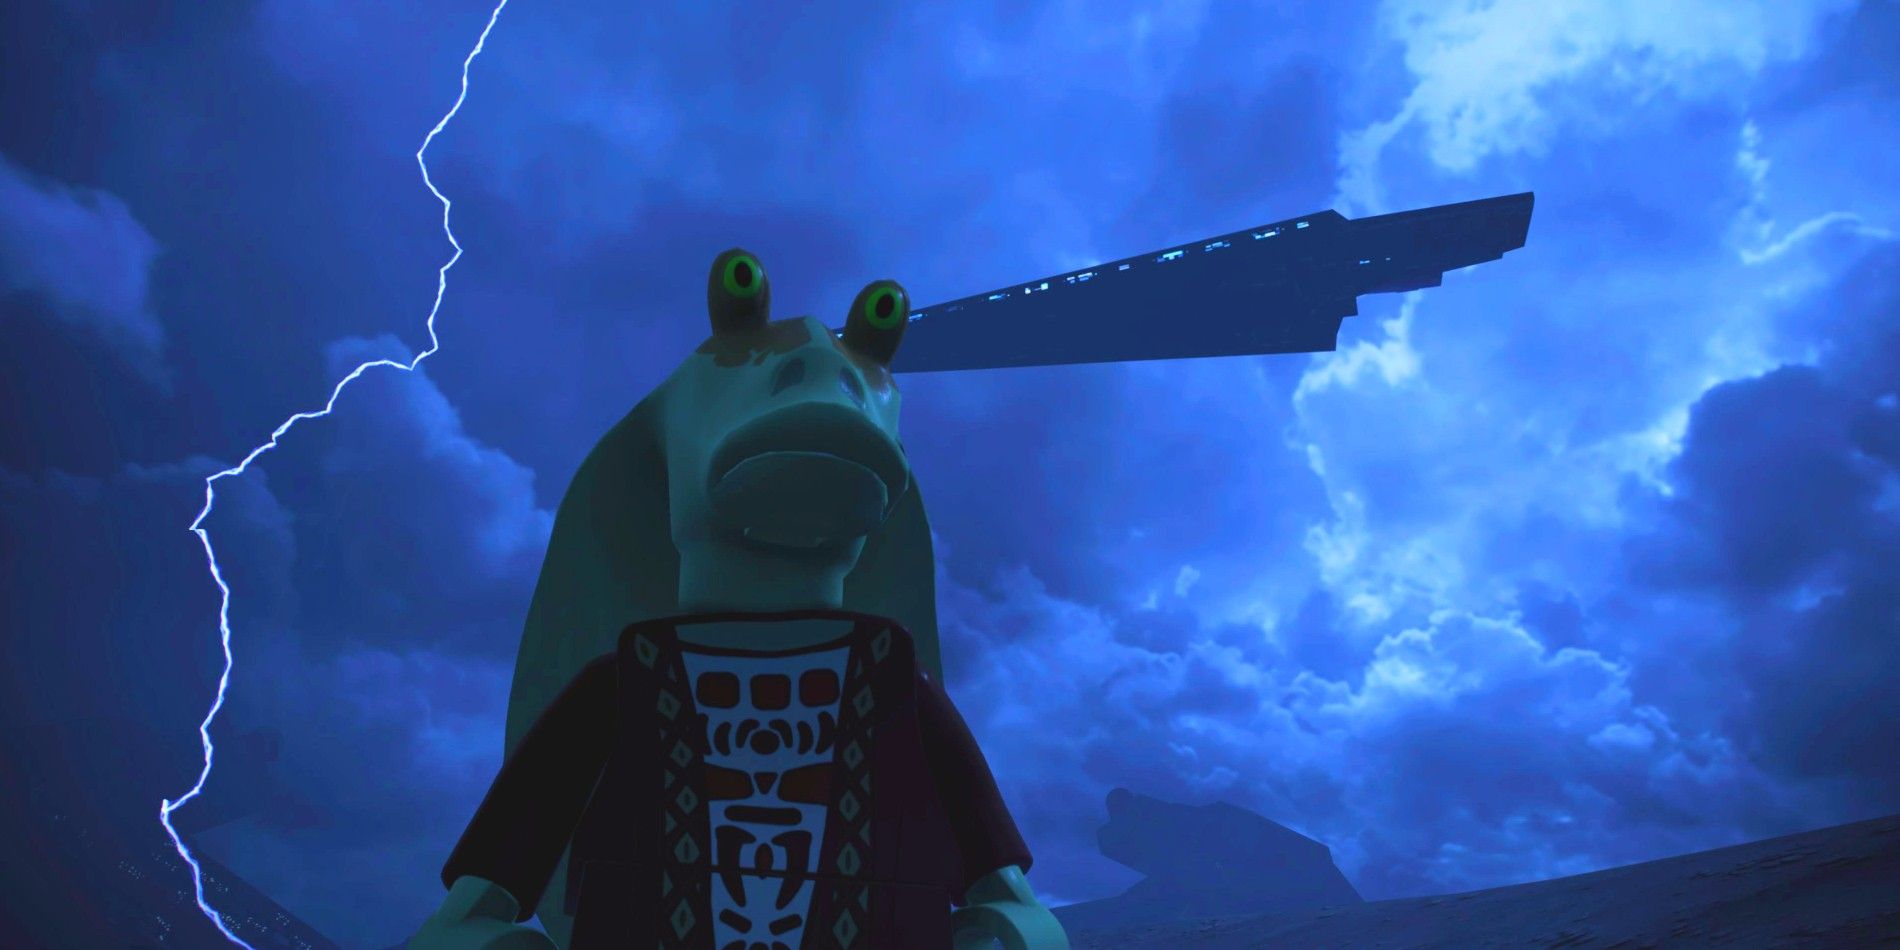 LEGO Star Wars' may prove that Jar Jar has been a Sith lord all along with his appearance on Exegol